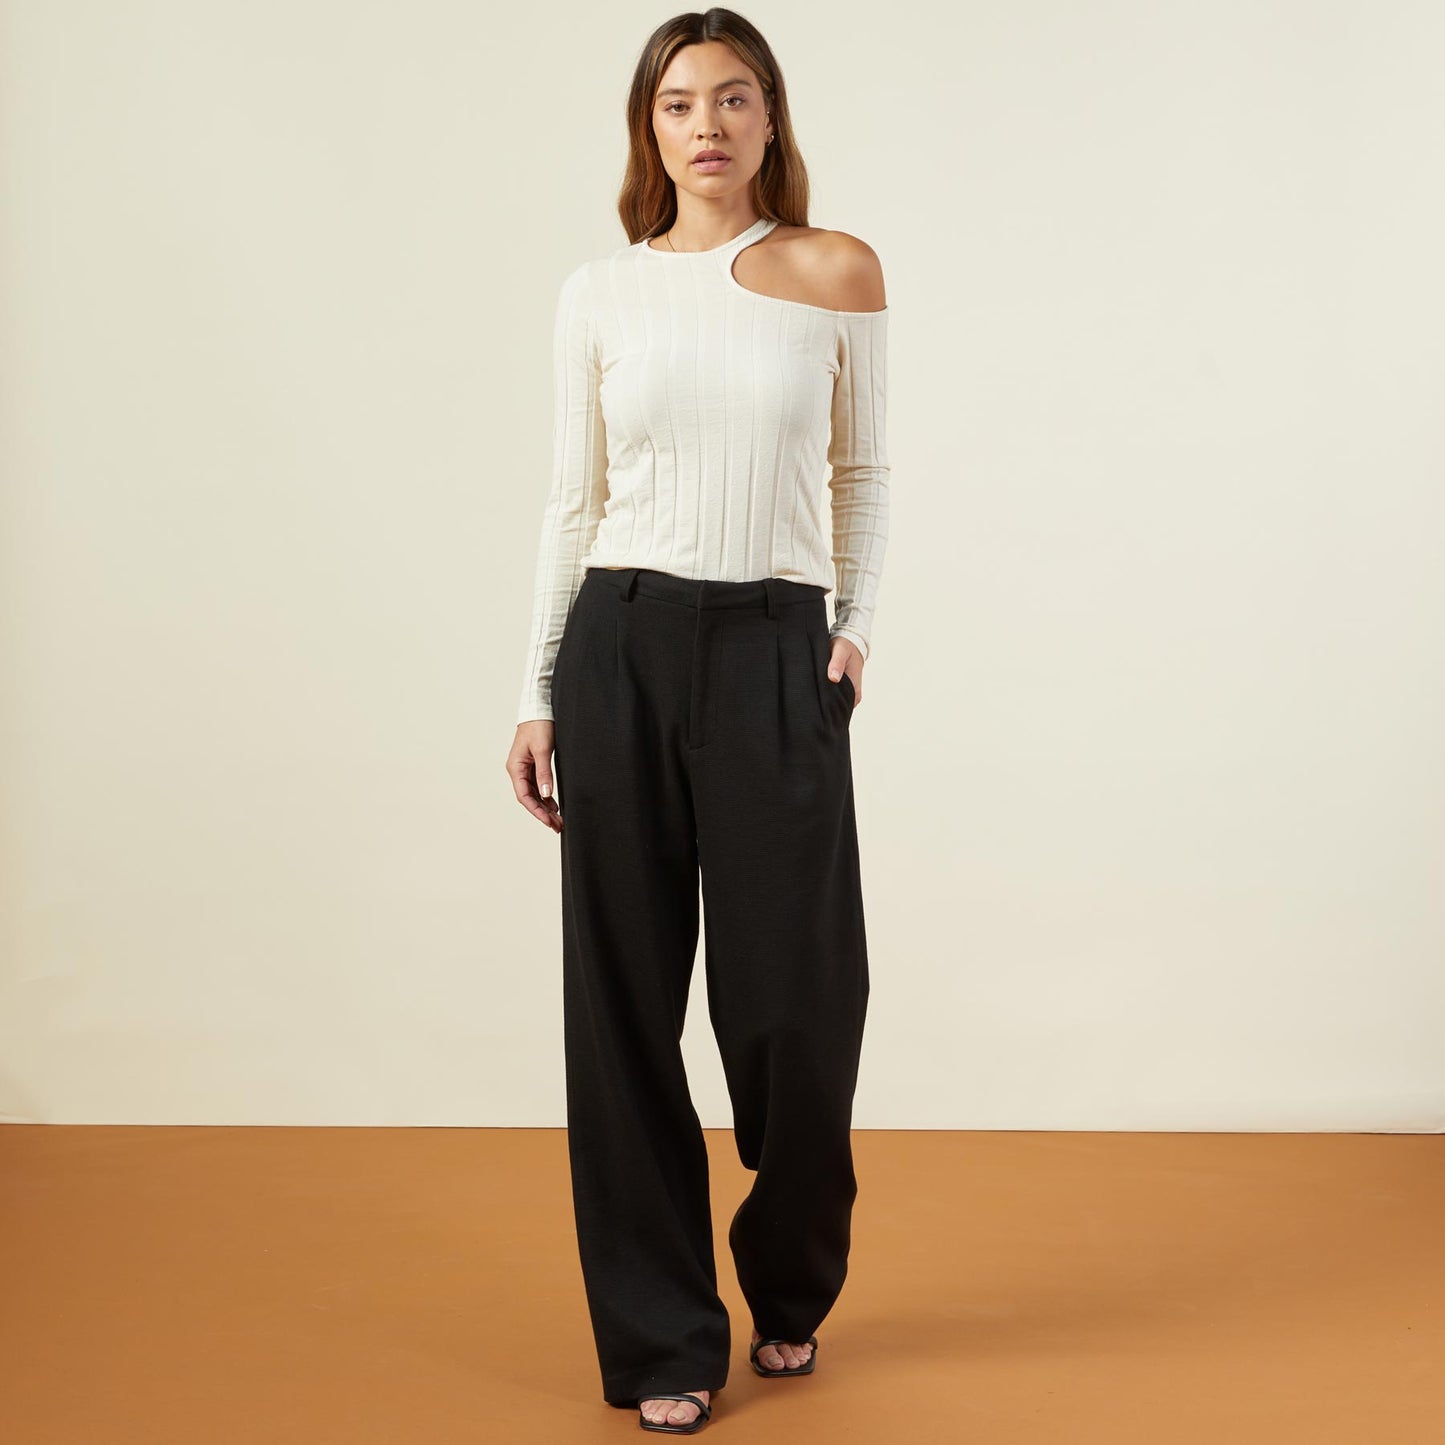 Front view of model wearing the flat rib asymmetric long sleeve in off white.